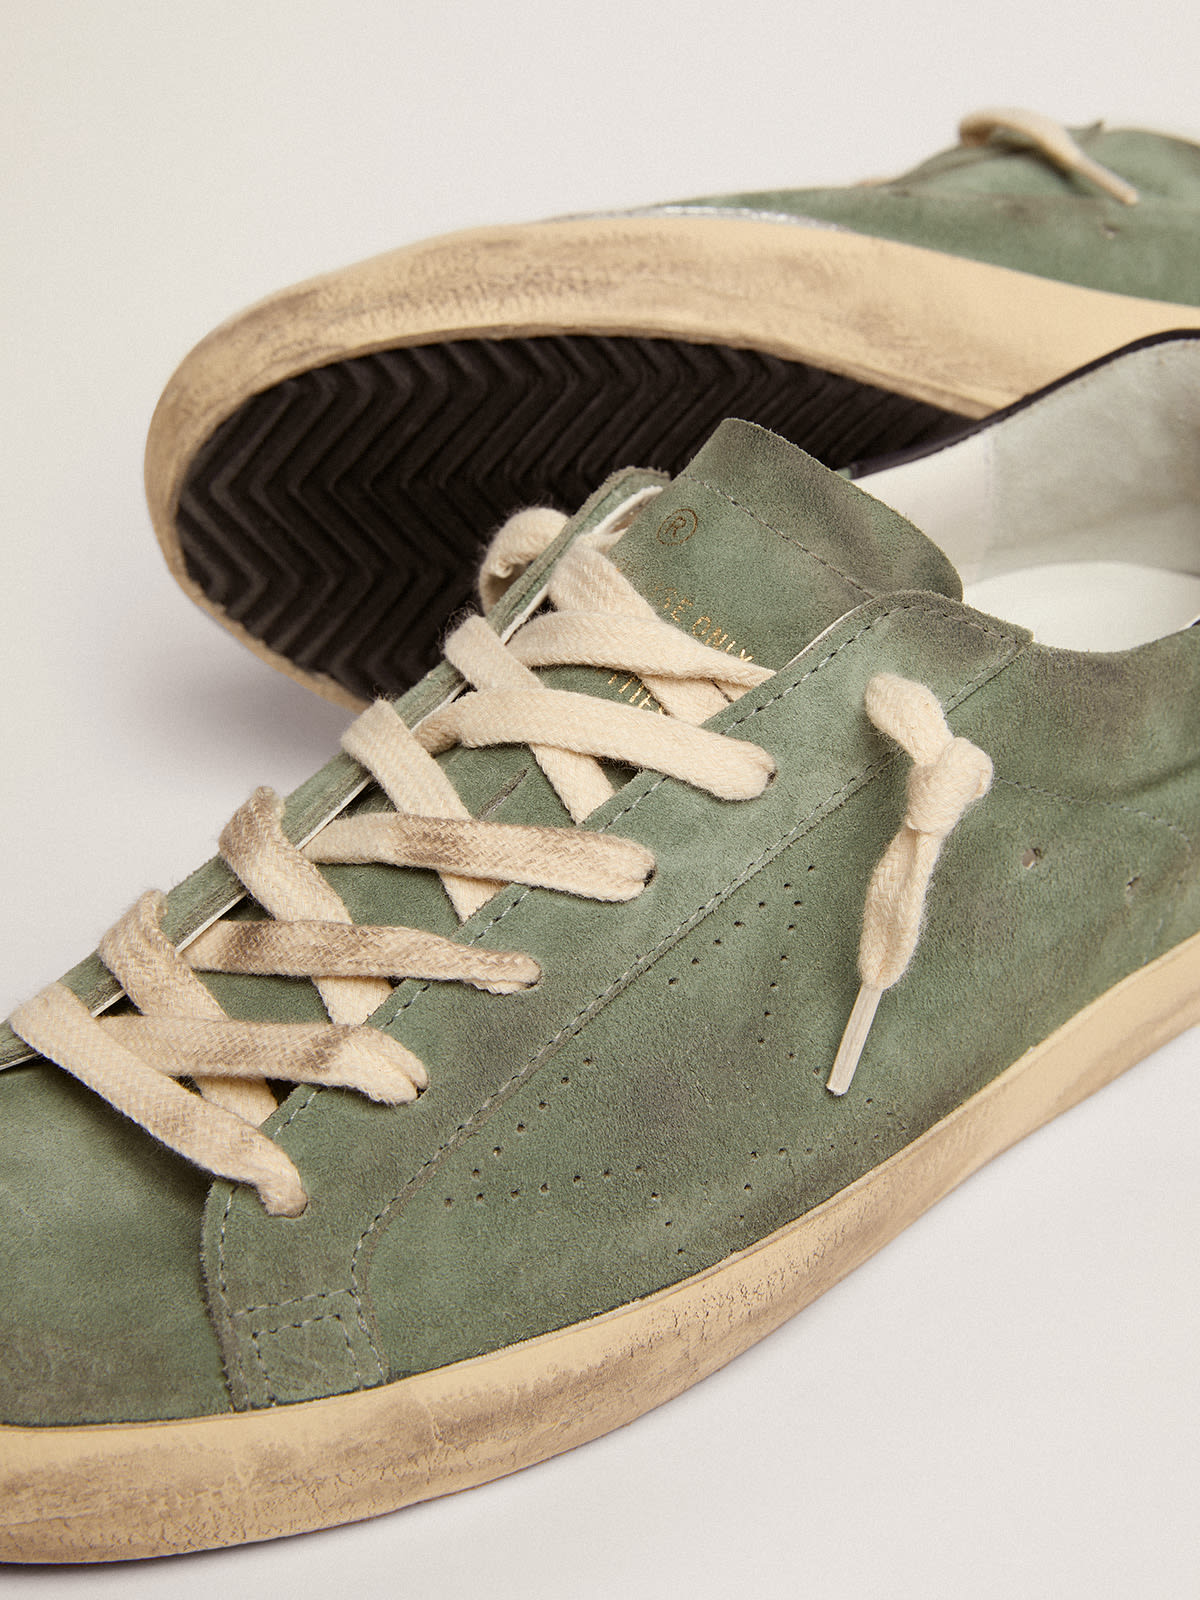 Golden Goose - Super-Star sneakers in military-green suede with perforated star and dark blue leather heel tab in 